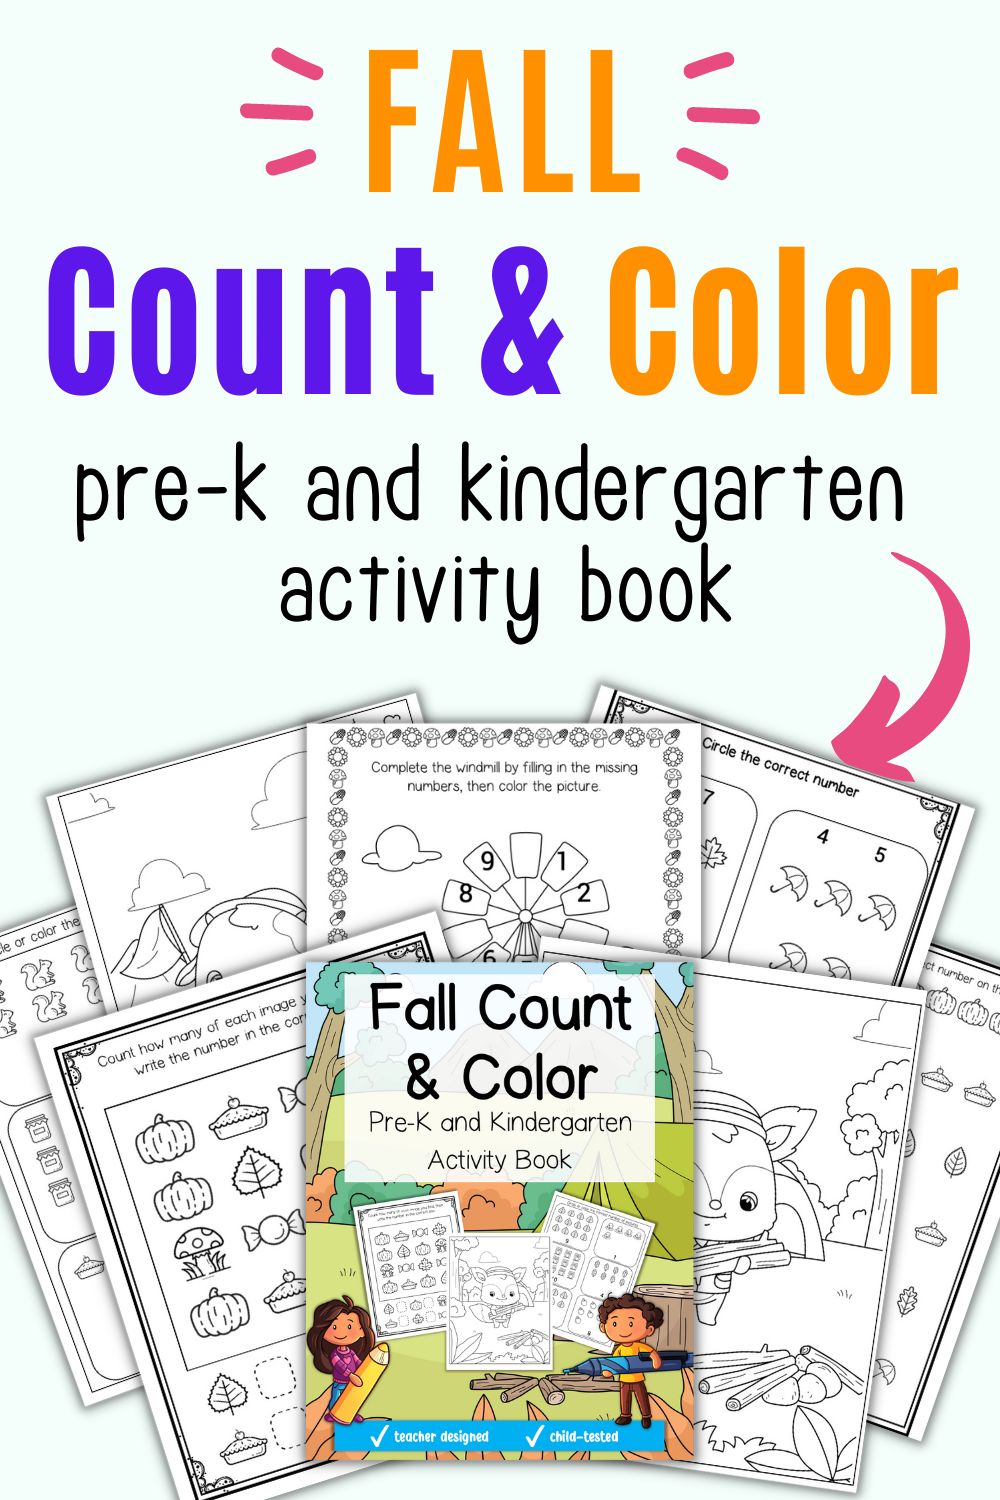 Text "fall count and color pre-k and kindergarten activity book"